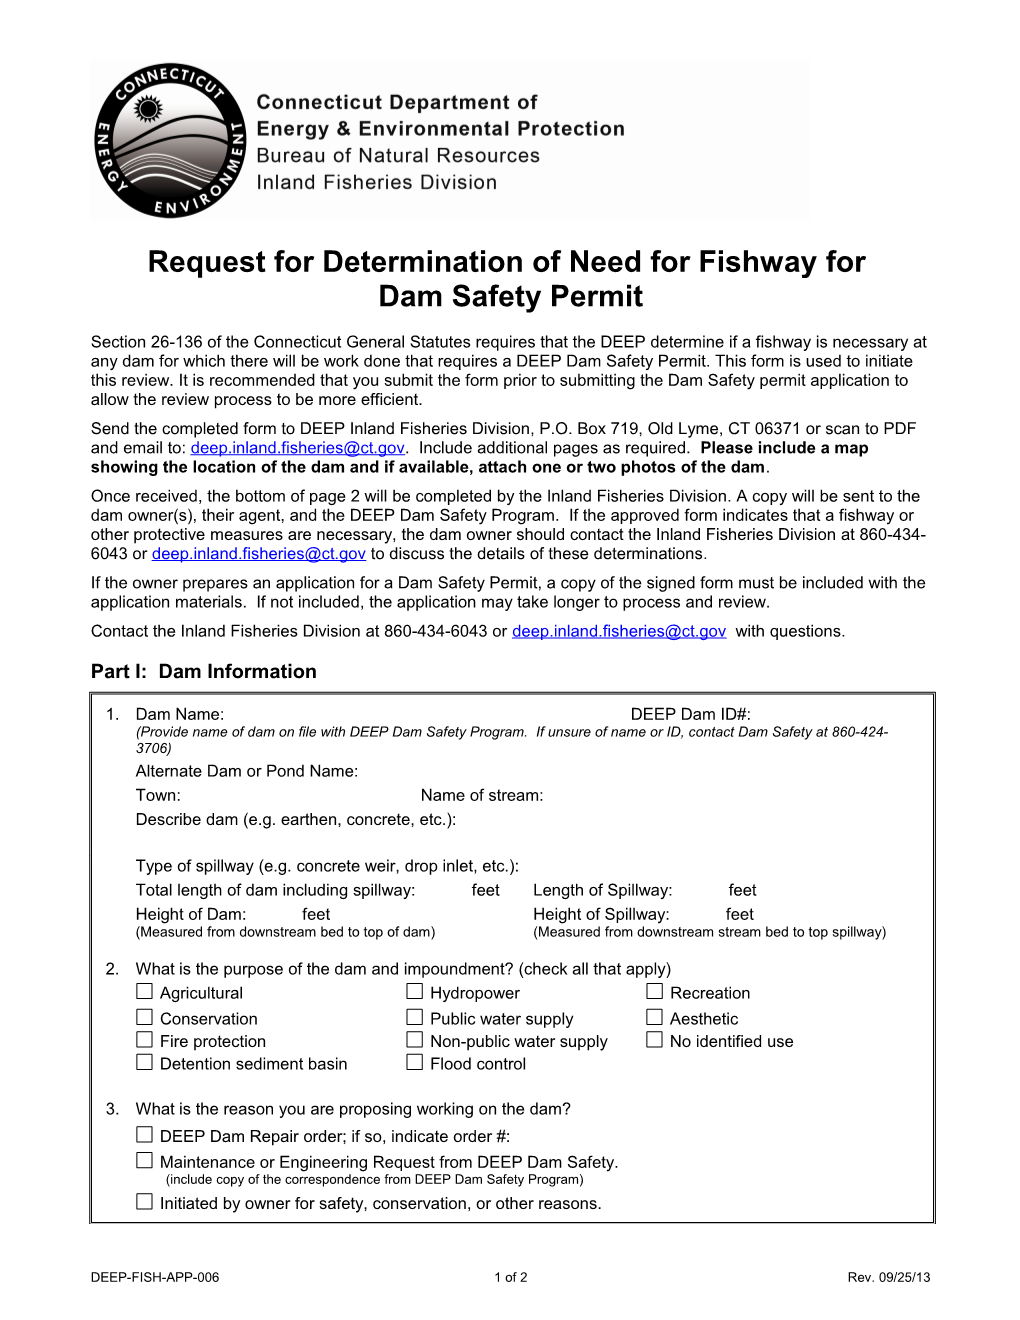 Request for Determination of Need for Fishway for Dam Safety Permit